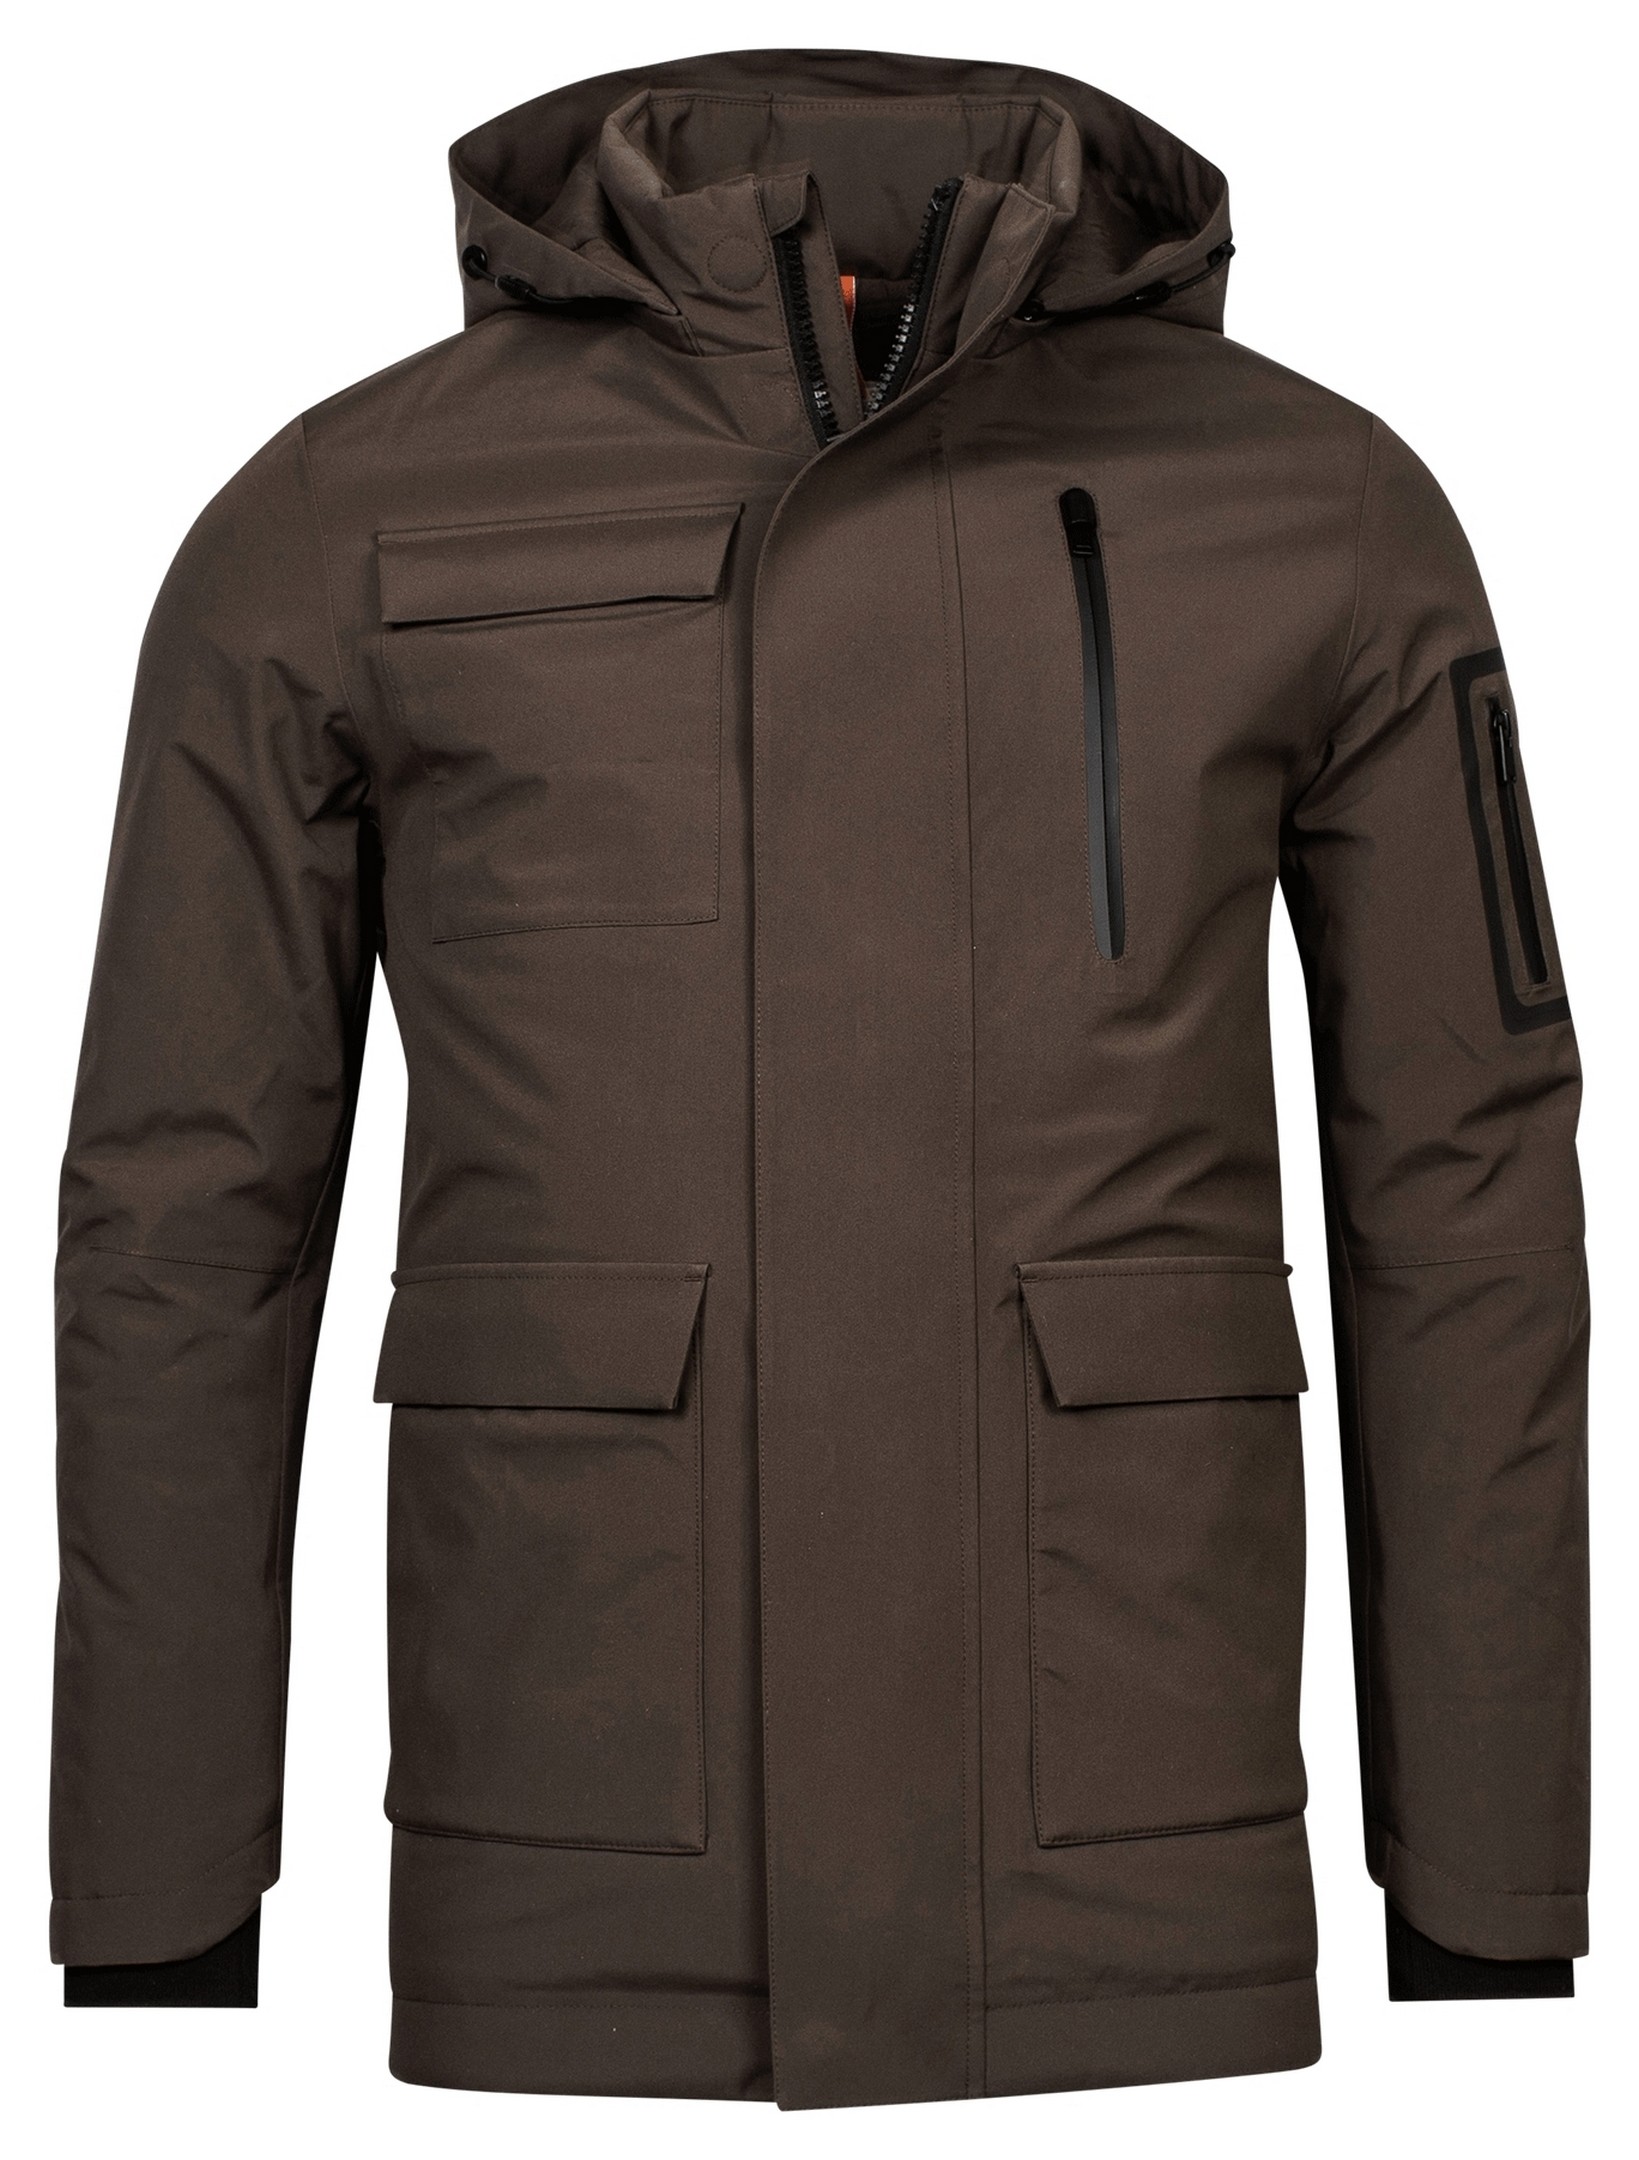 Giordano Jacket Removeable Hood Water and Windproof Fabric Dark Navy | Jan  Rozing Men\'s Fashion